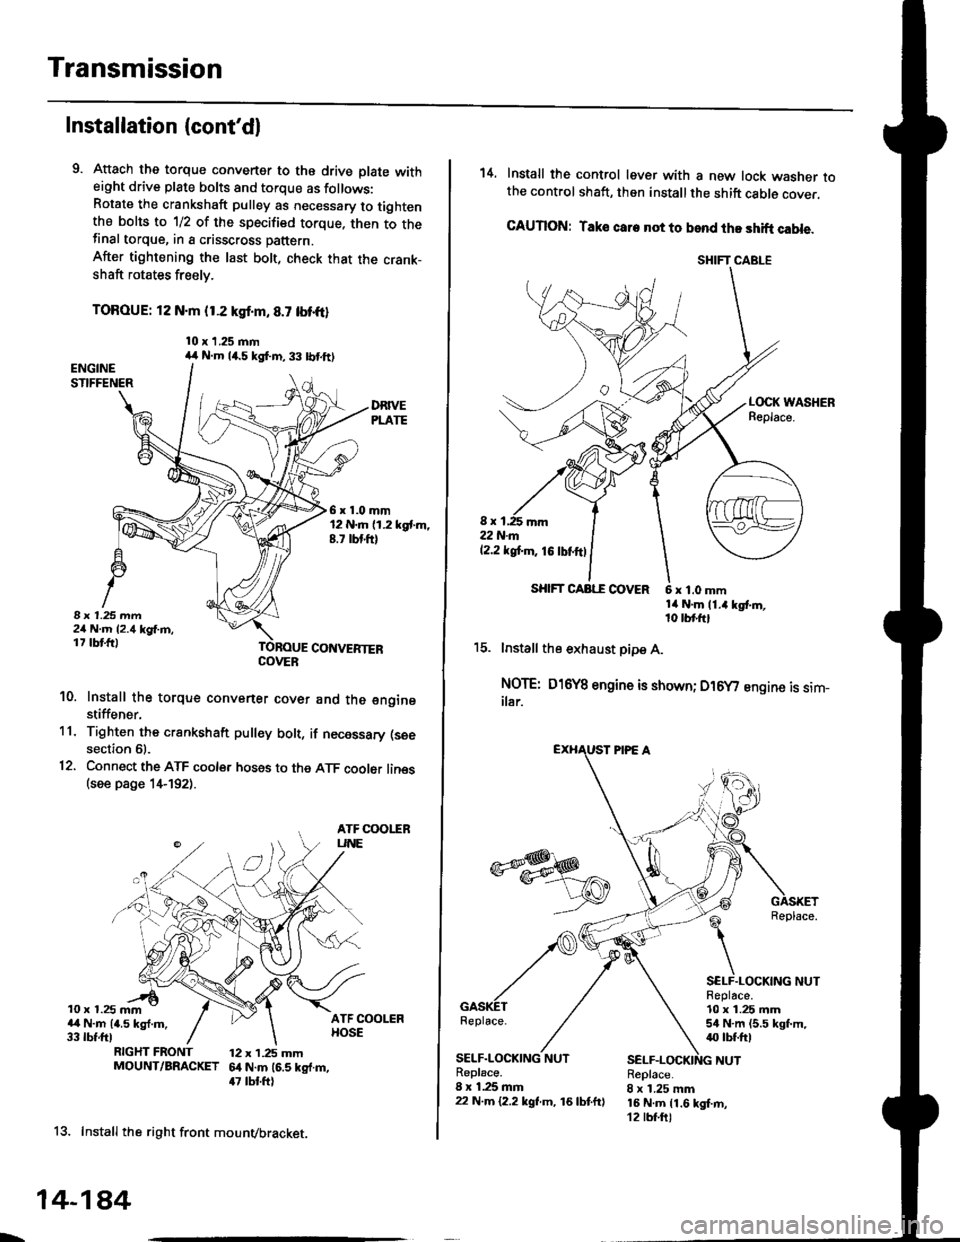 HONDA CIVIC 1996 6.G Workshop Manual Transmission
Installation (contdl
9. Attach the torque converter to the drive plate witheight drive plate bolts and torque as follows:Rotate the crankshaft pulley as necessary to tightenthe bolts to 